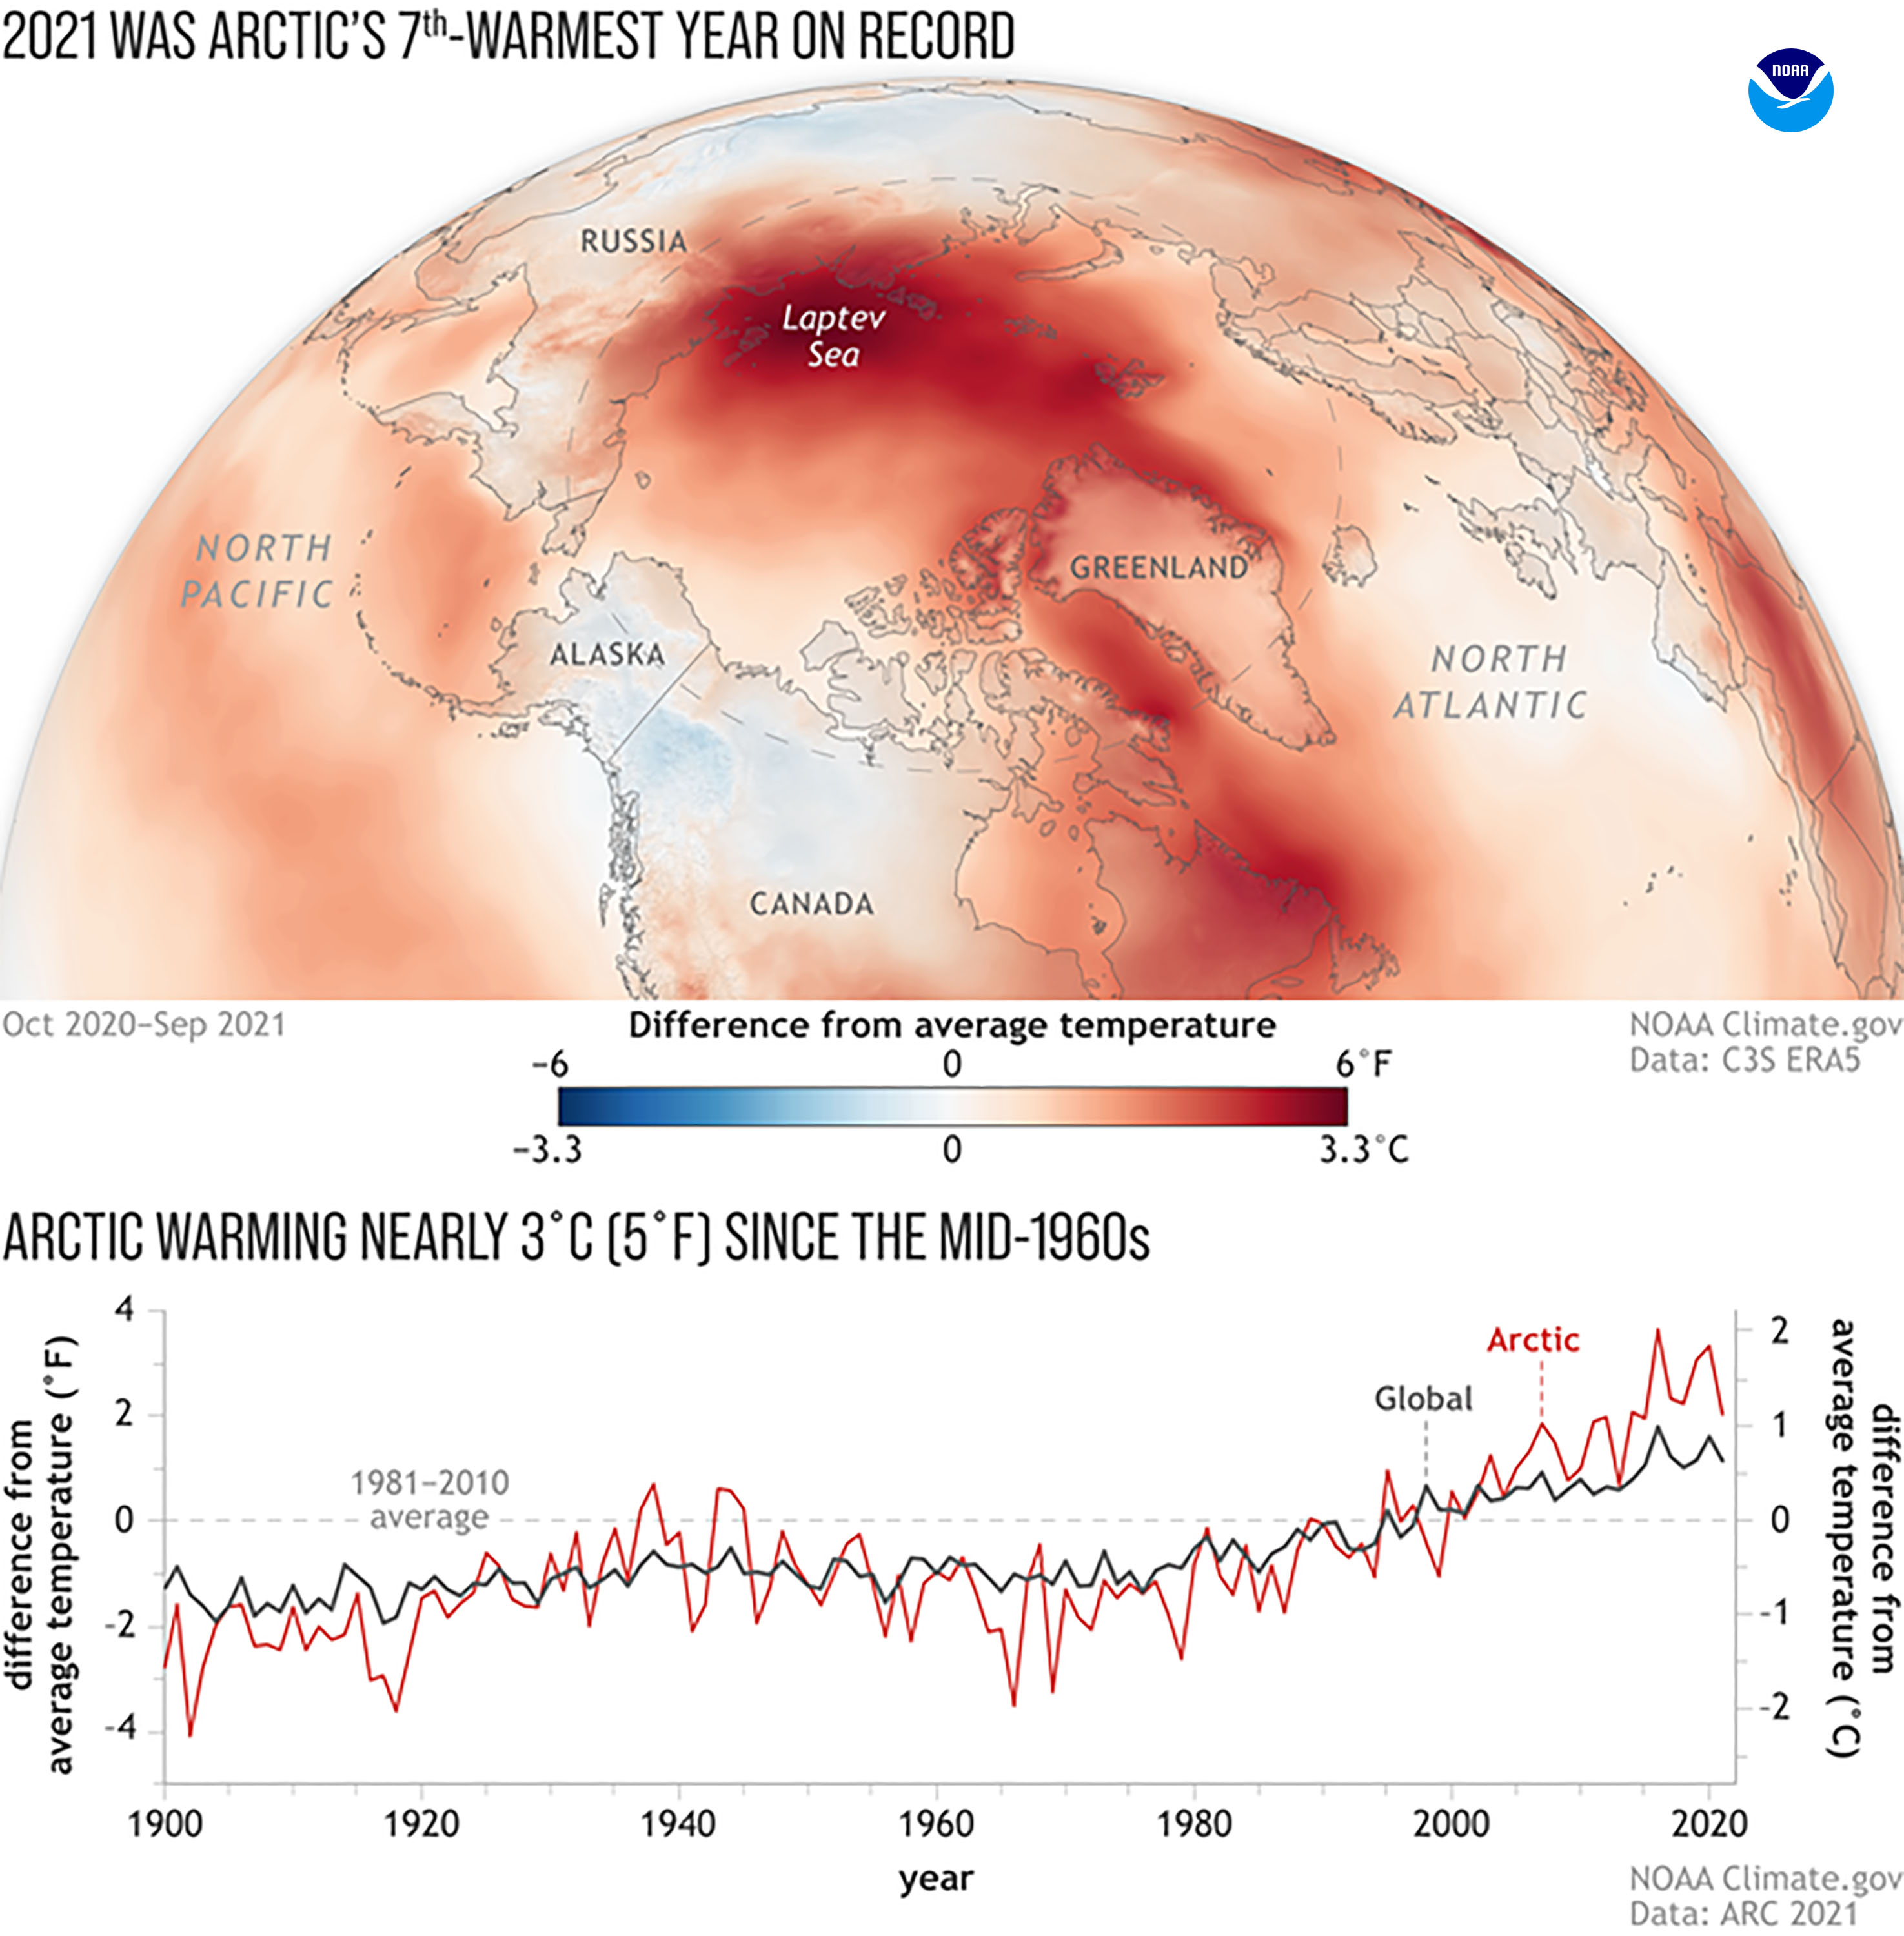 The year 2020 in the Arctic saw the 7th warmest air temperature in the instrumental record. The top image depicts the departure from the average temperature across the Arctic in 2020, with redder colors showing areas of greater warmth.  The bottom half of this graphic shows how Arctic air temperatures varied from global temperatures since 1900.